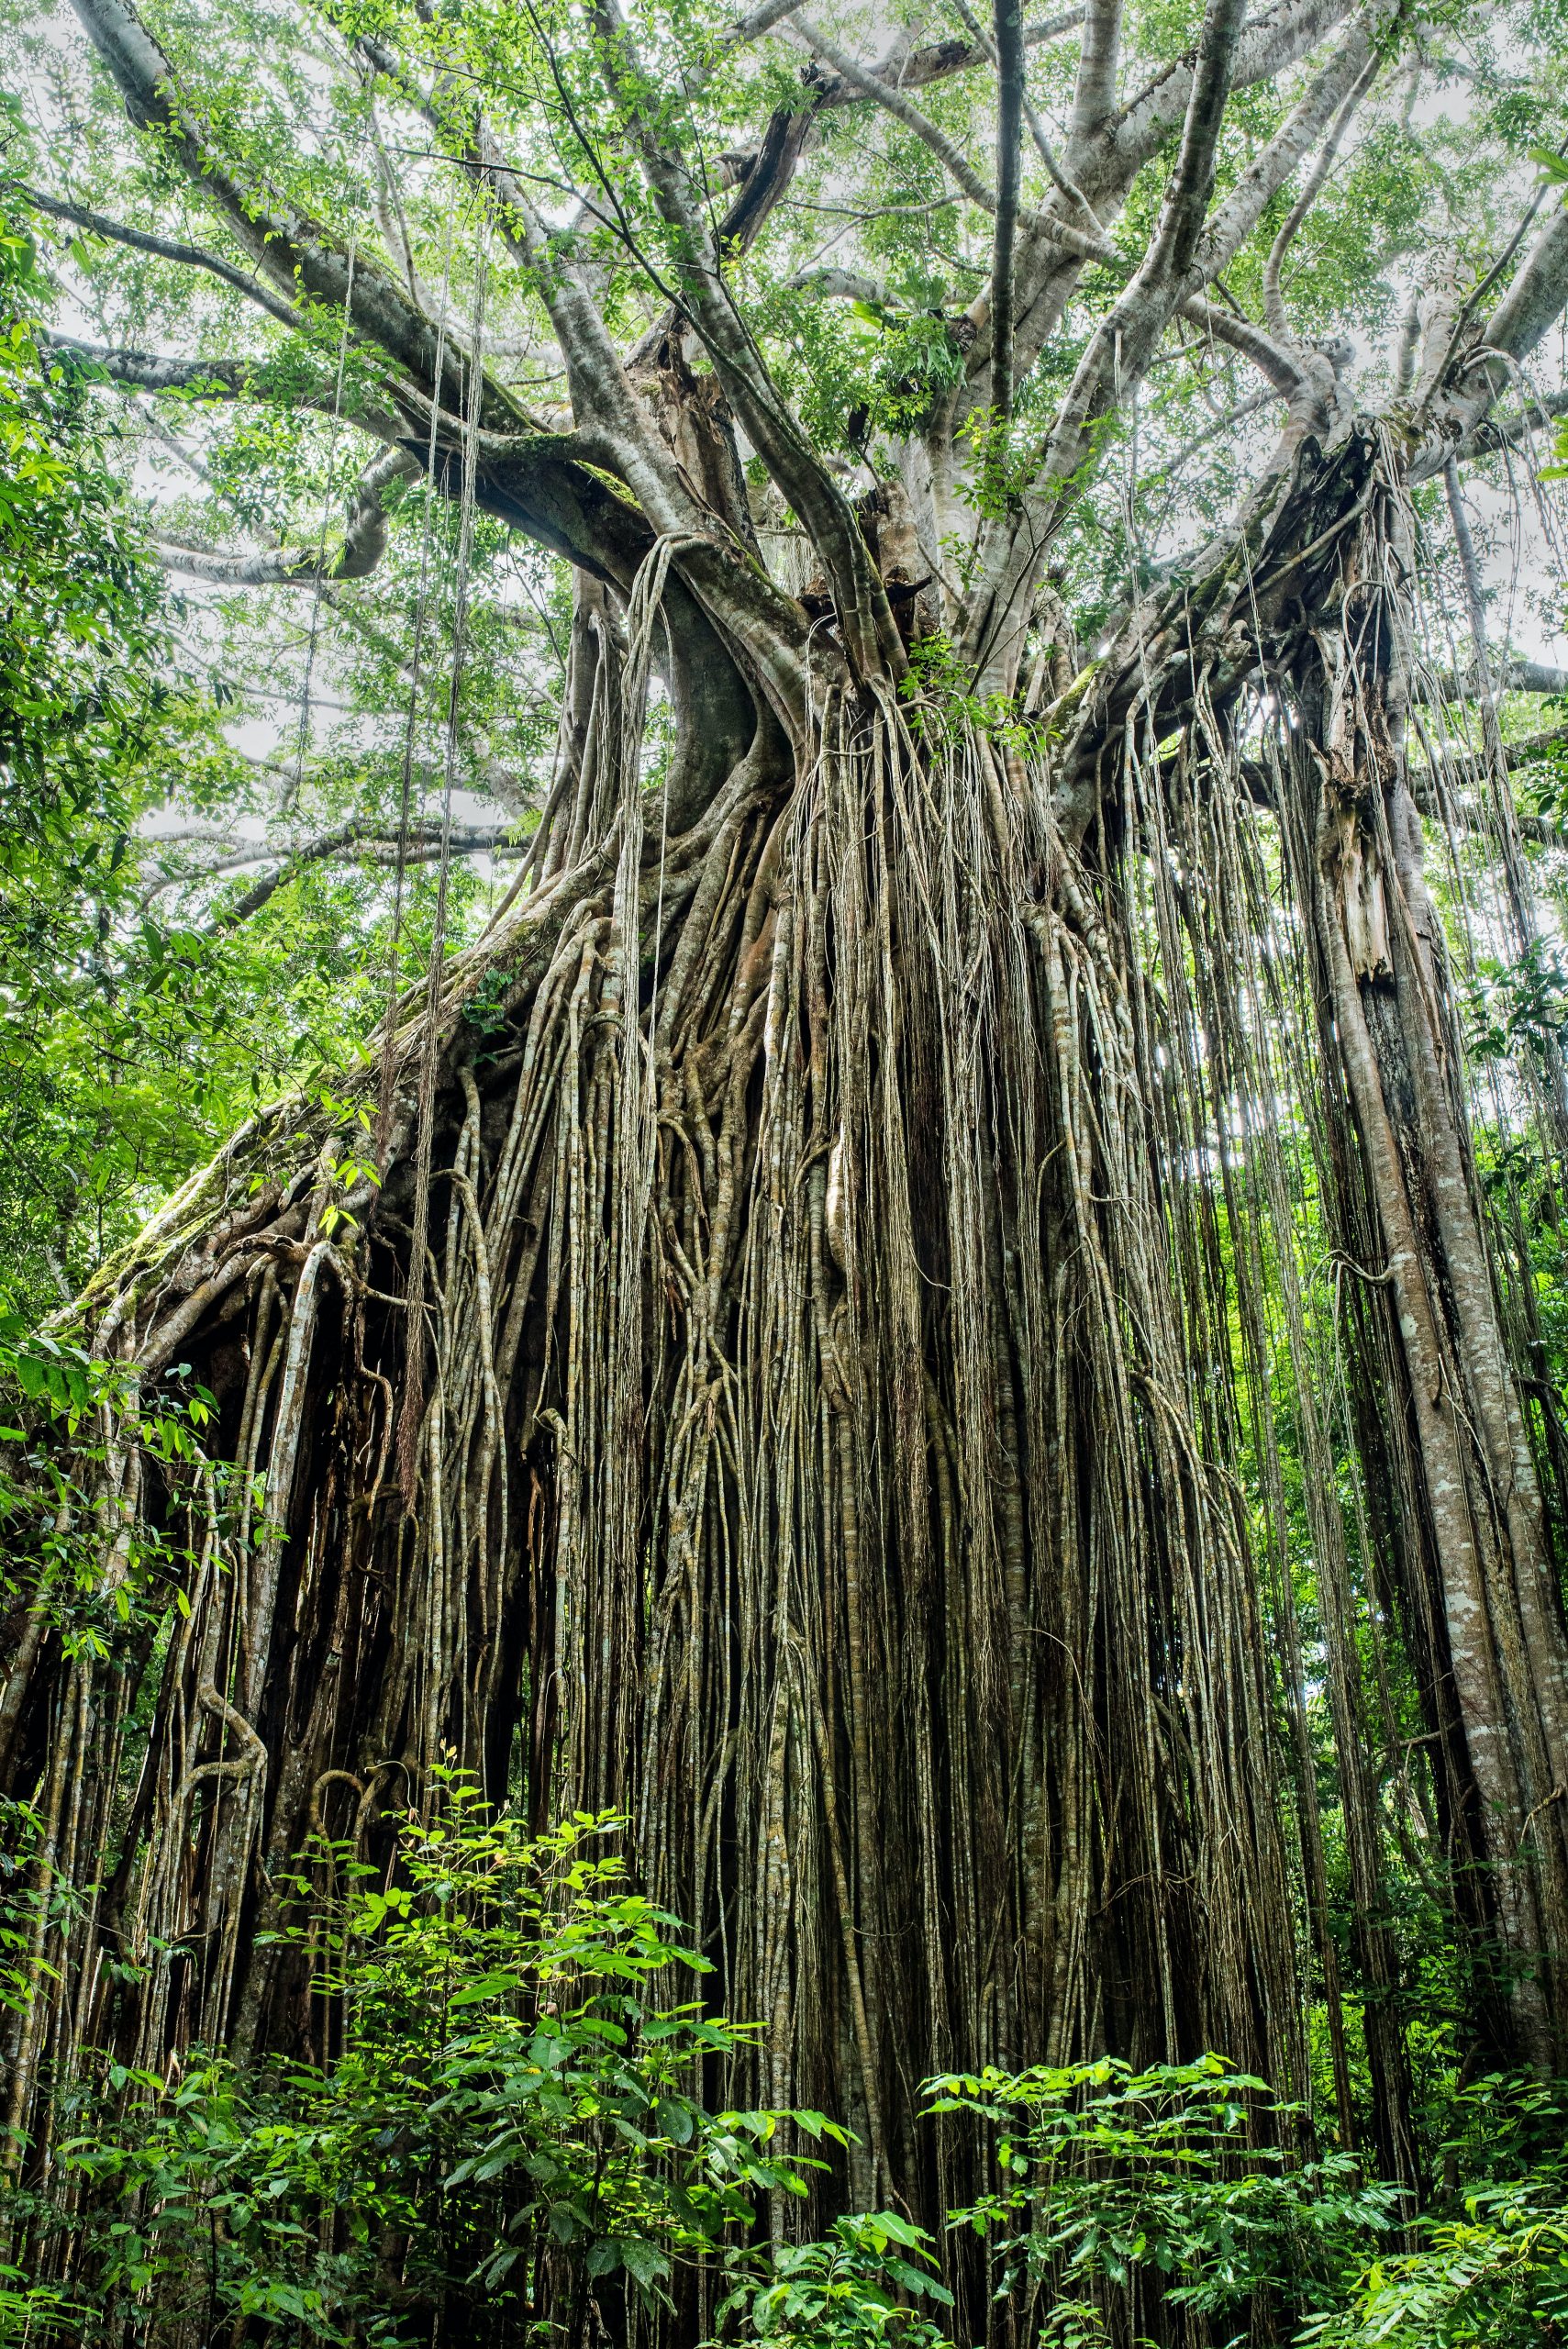 Curtain Fig Tree in the Tablelands, Queensland, Australia